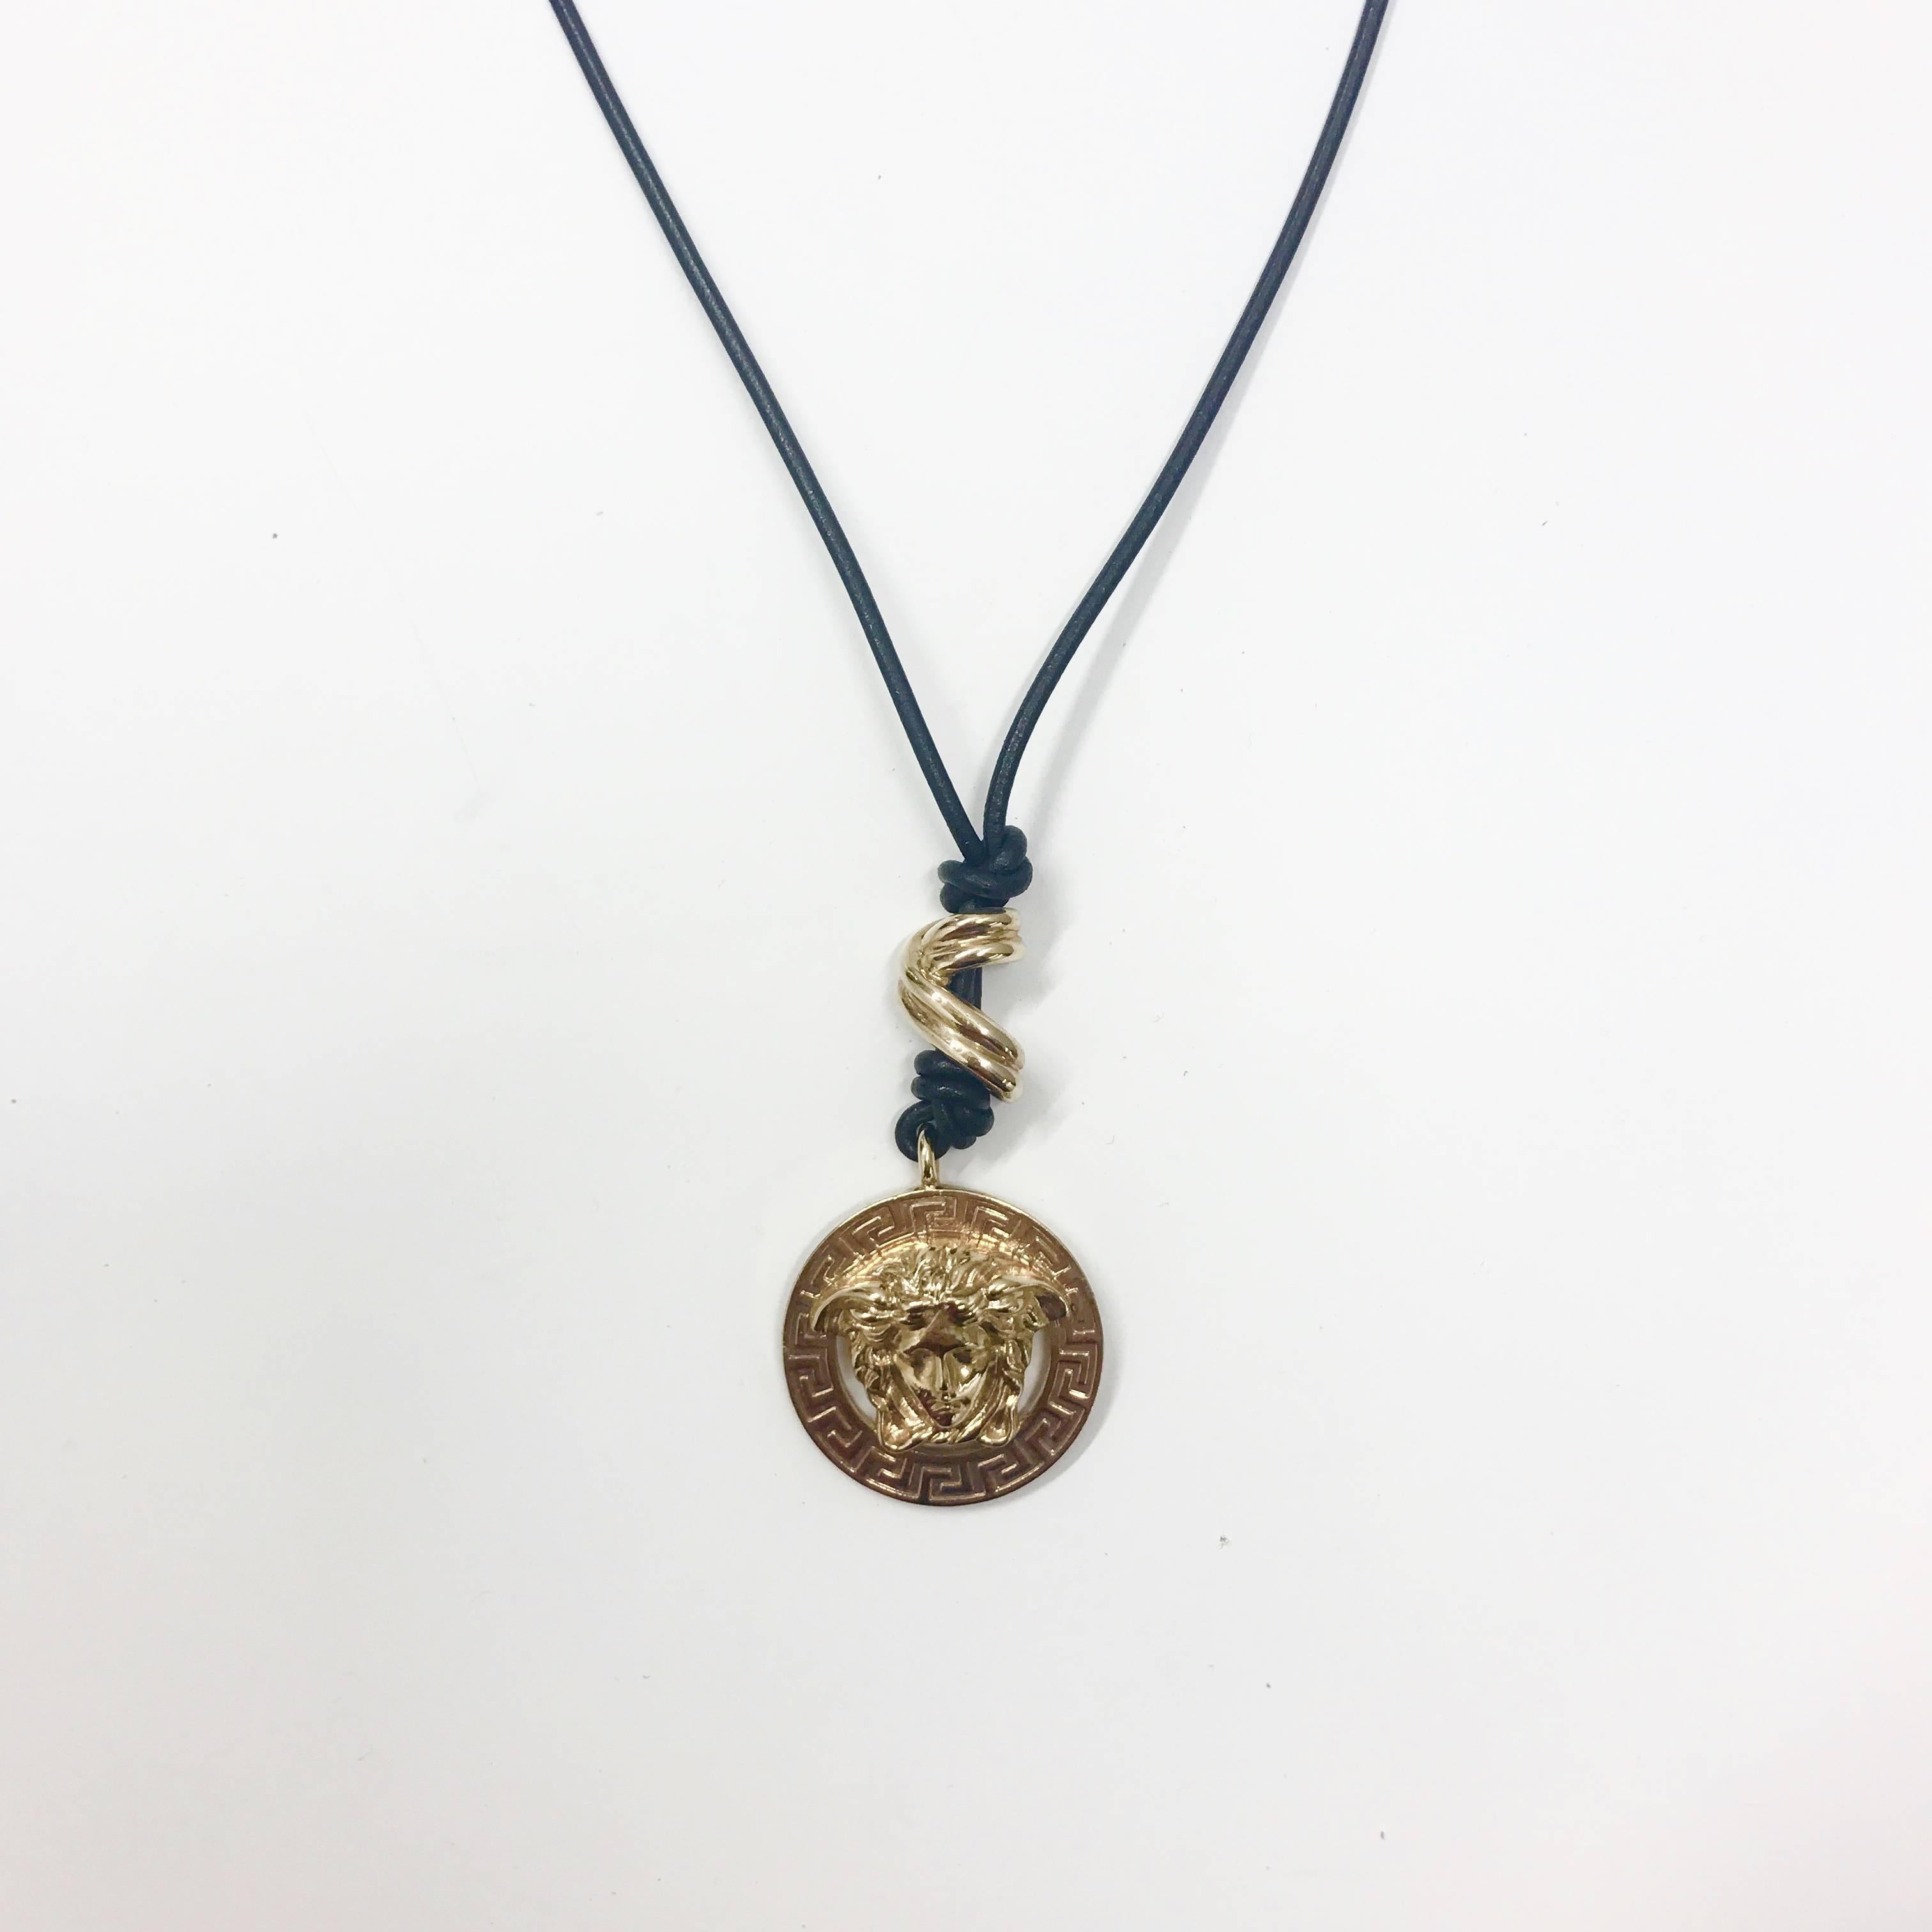 The classic medusa Versace gold tone metal pendant. The knotted leather strap is inspired by the sun drenched and rustic beach culture of Gianni’s costal home region of Calabria. the medallion itself is engraved with his iconic greek titling motif